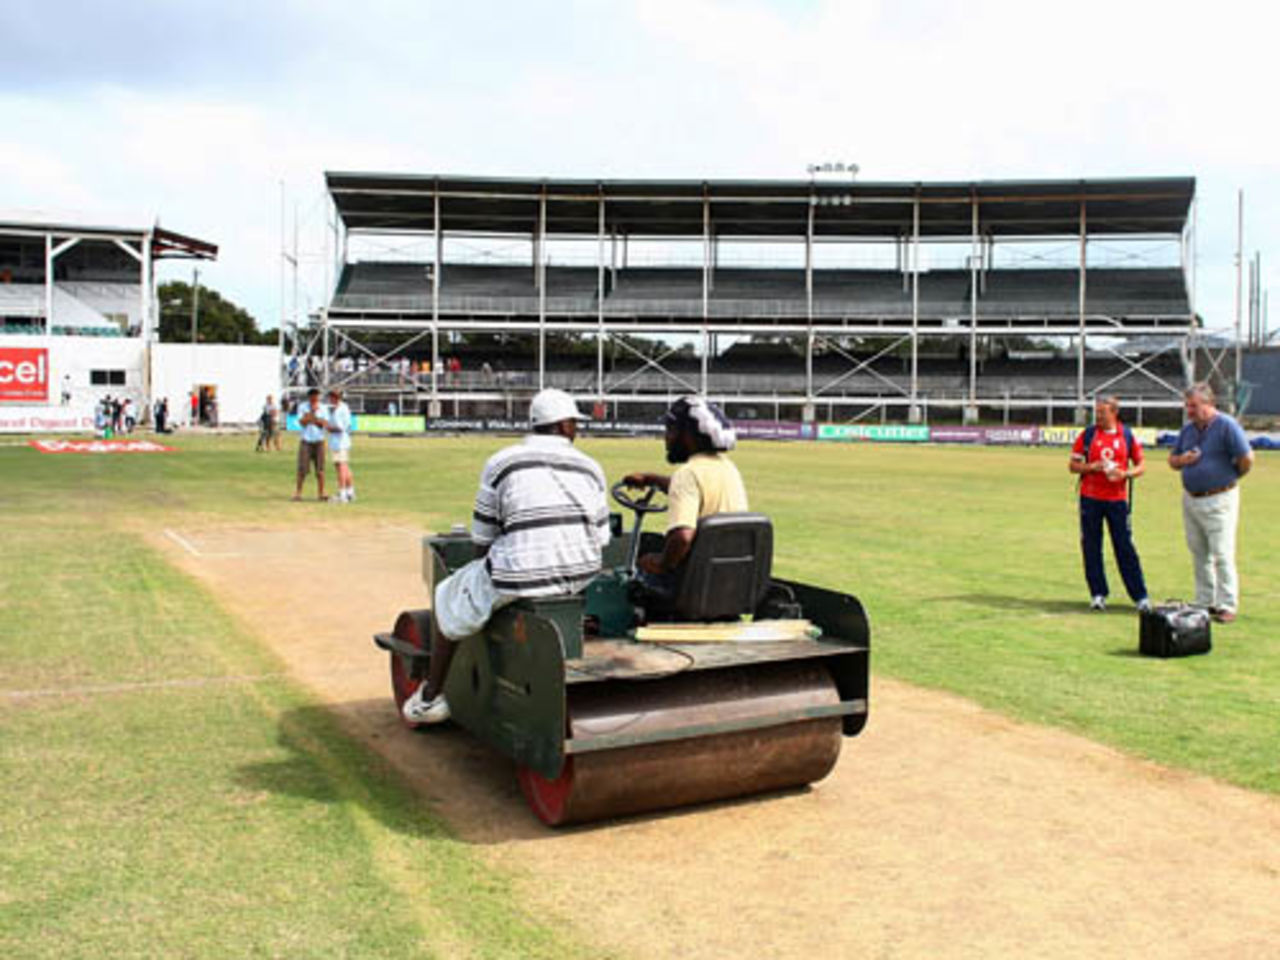 The pitch is rolled at the Antigua Recreation Ground, Antigua, February 14, 2009